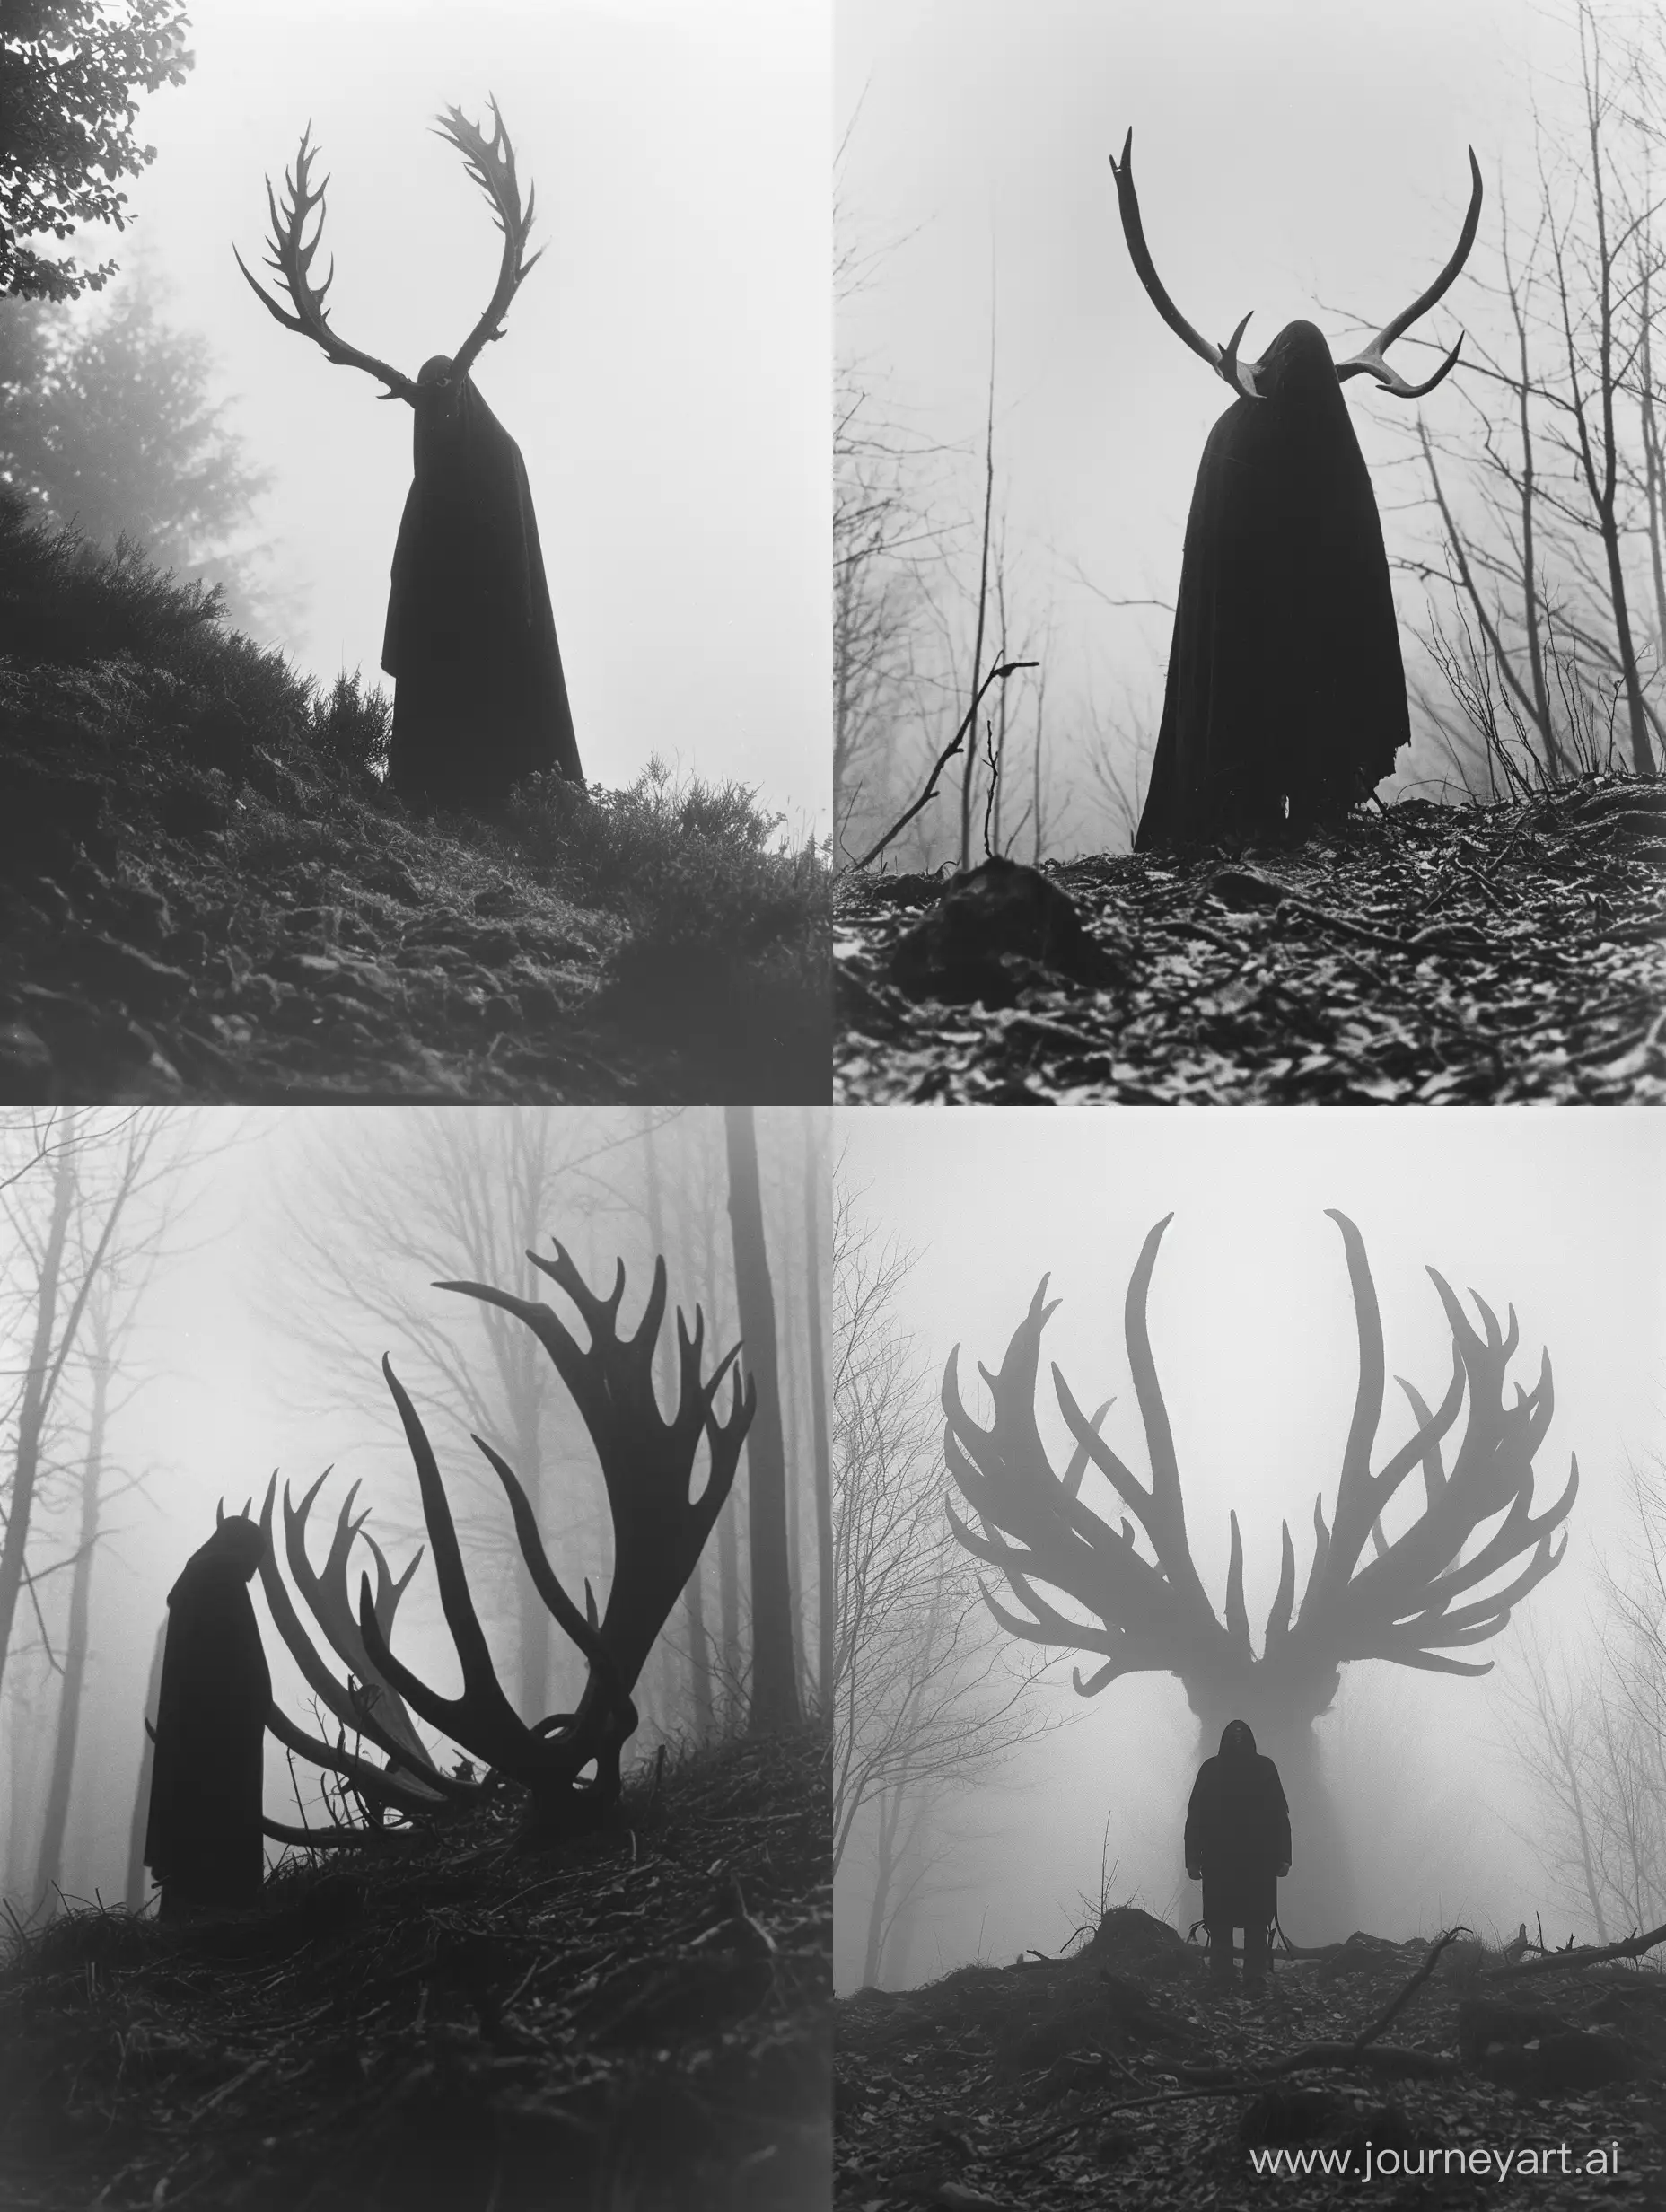 Mysterious-Encounter-in-Foggy-Woods-Pagan-Witch-and-Demonic-Entity-with-Antlers